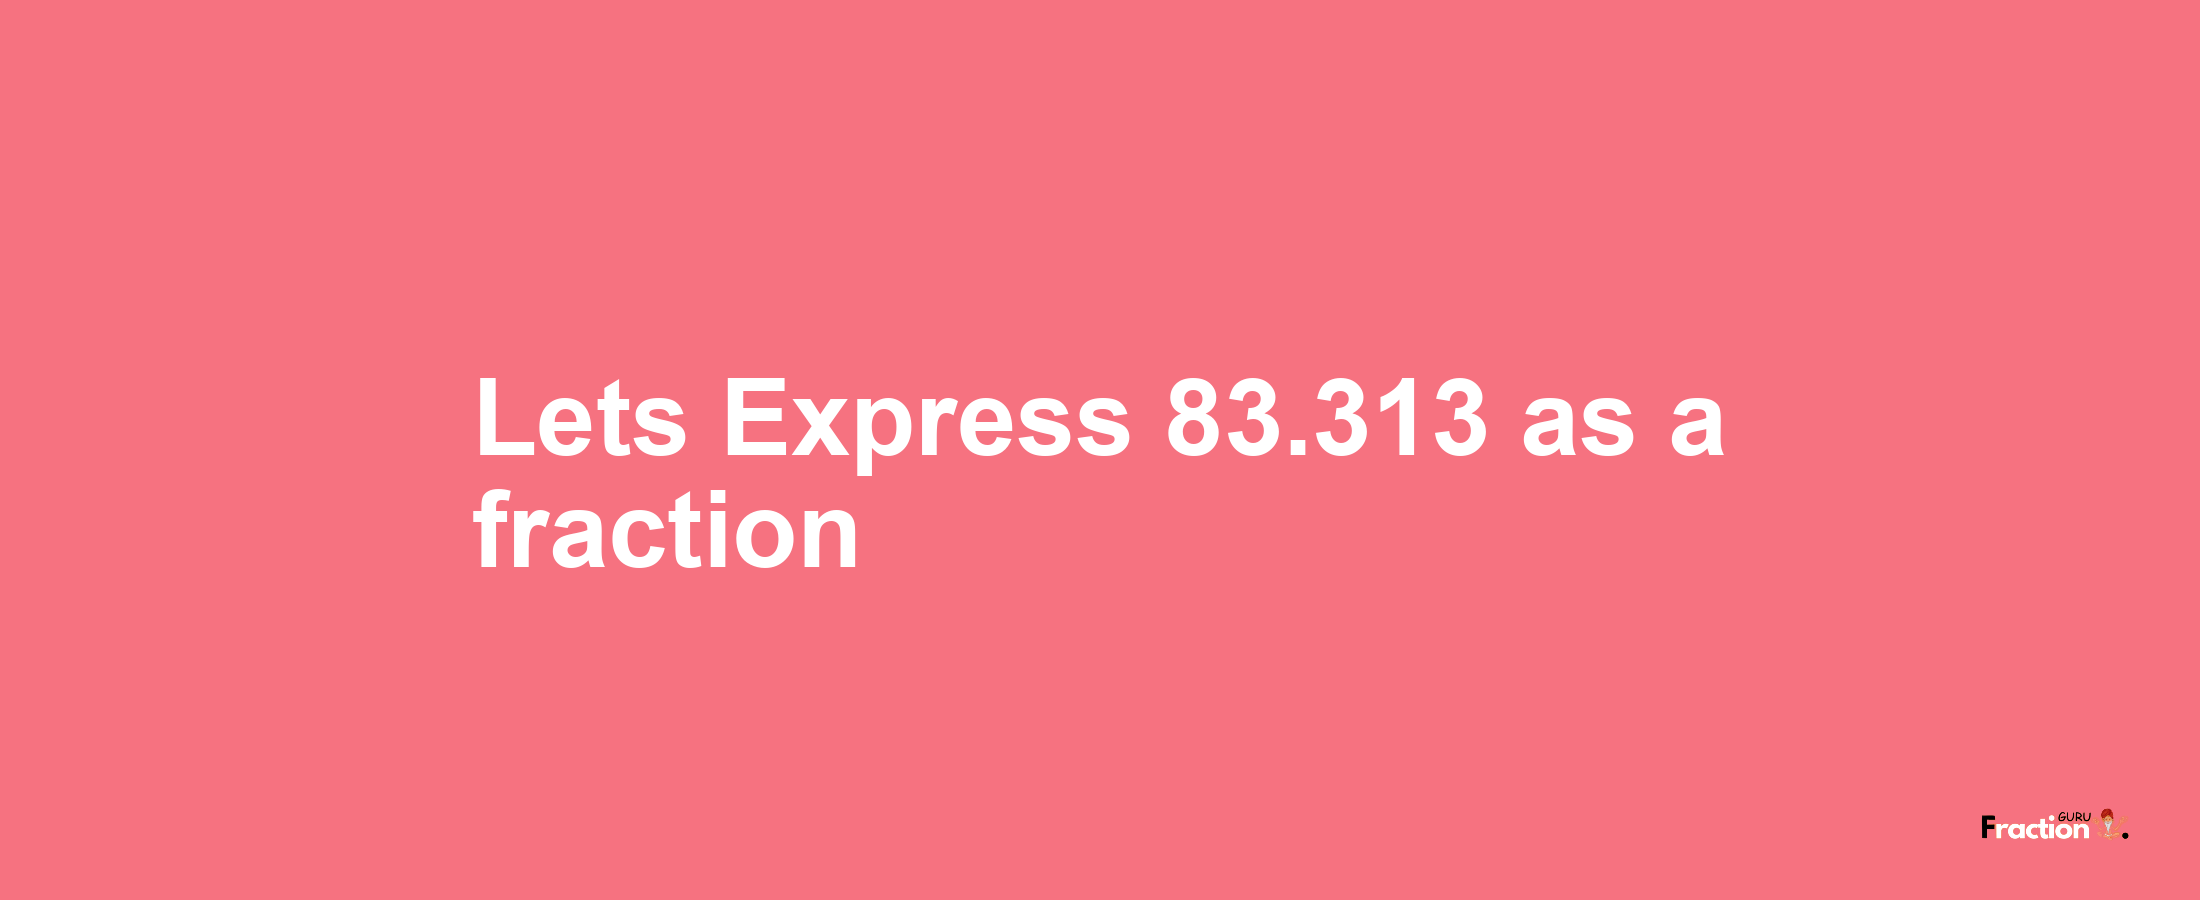 Lets Express 83.313 as afraction